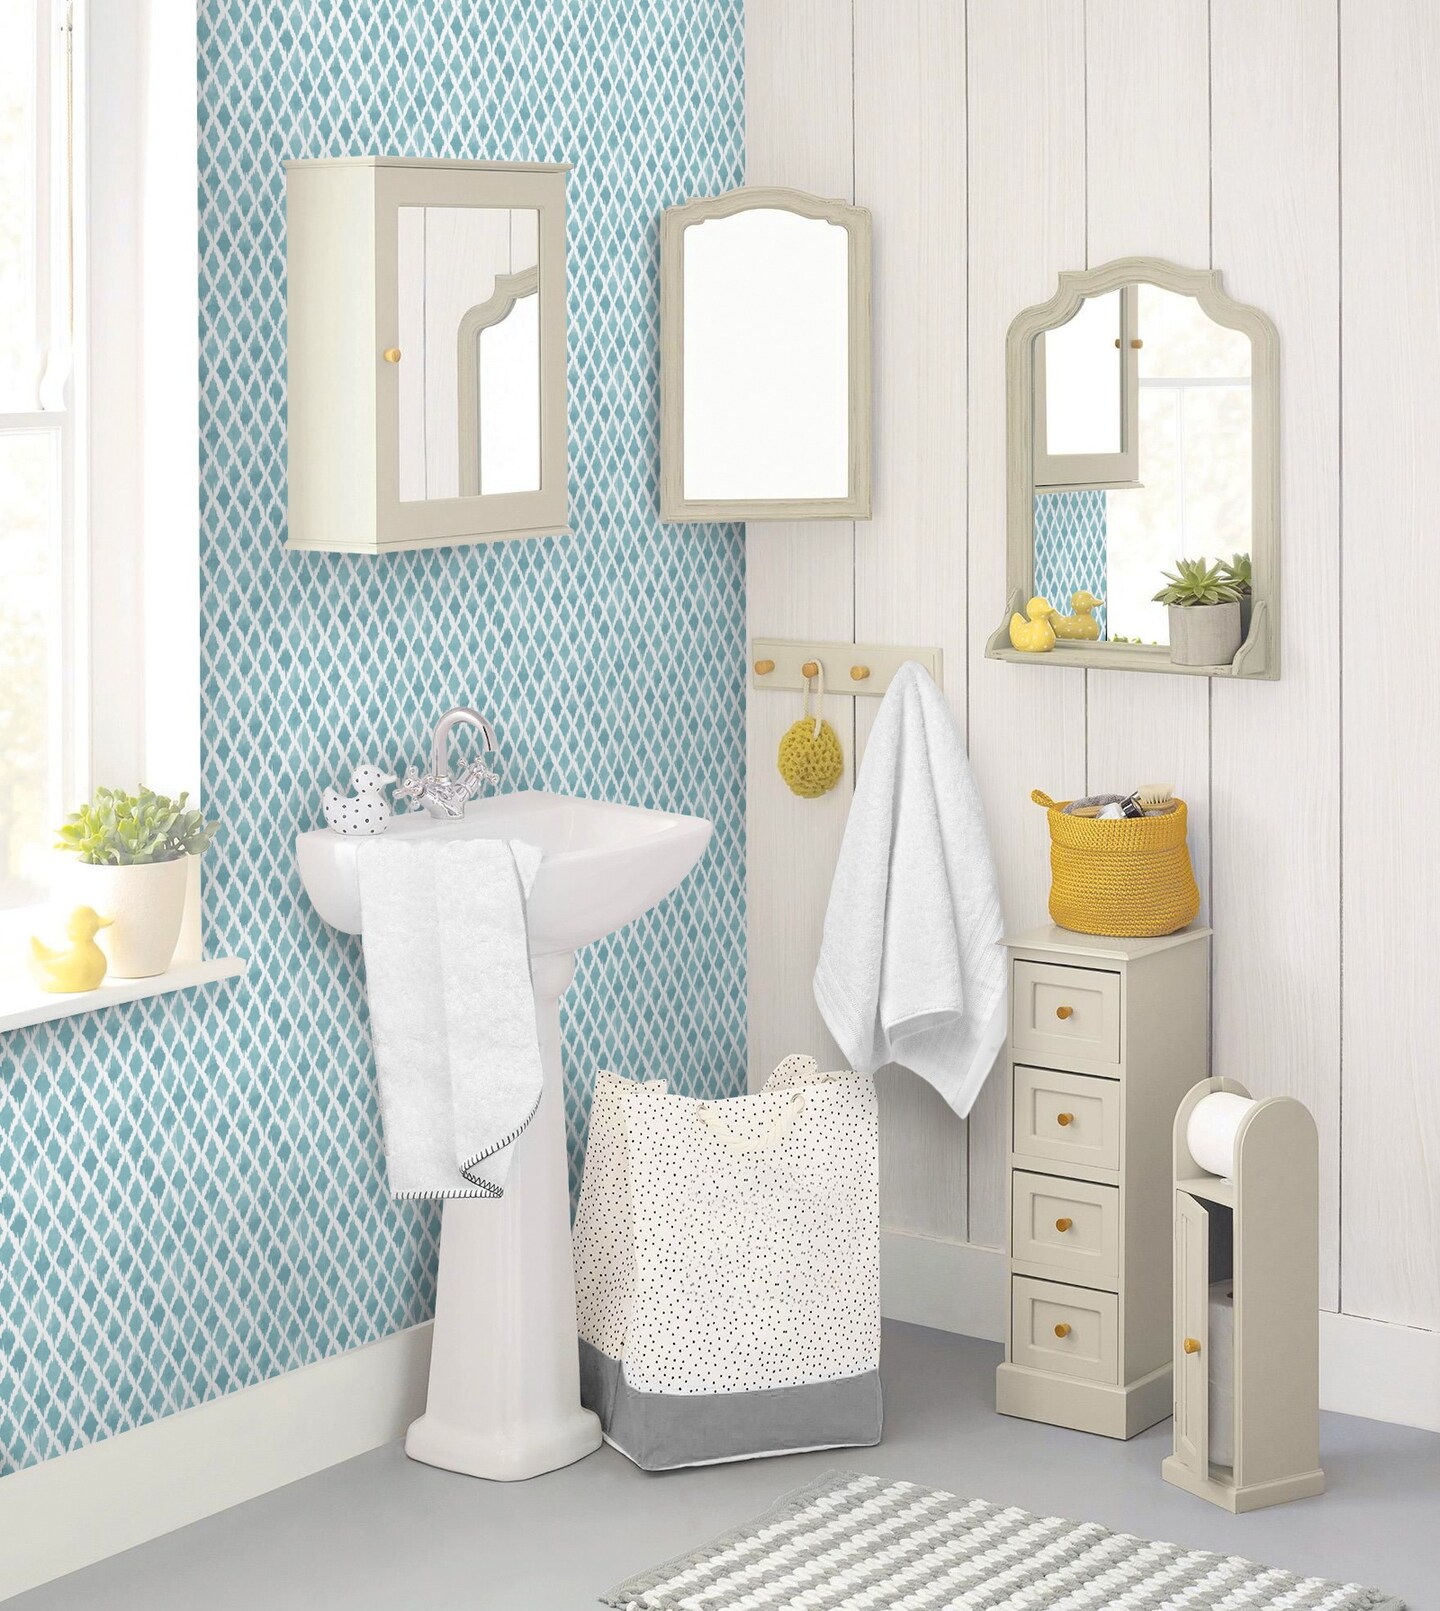 Americanflat Adhesive Mirror Tiles - Peel and Stick Mirrors for